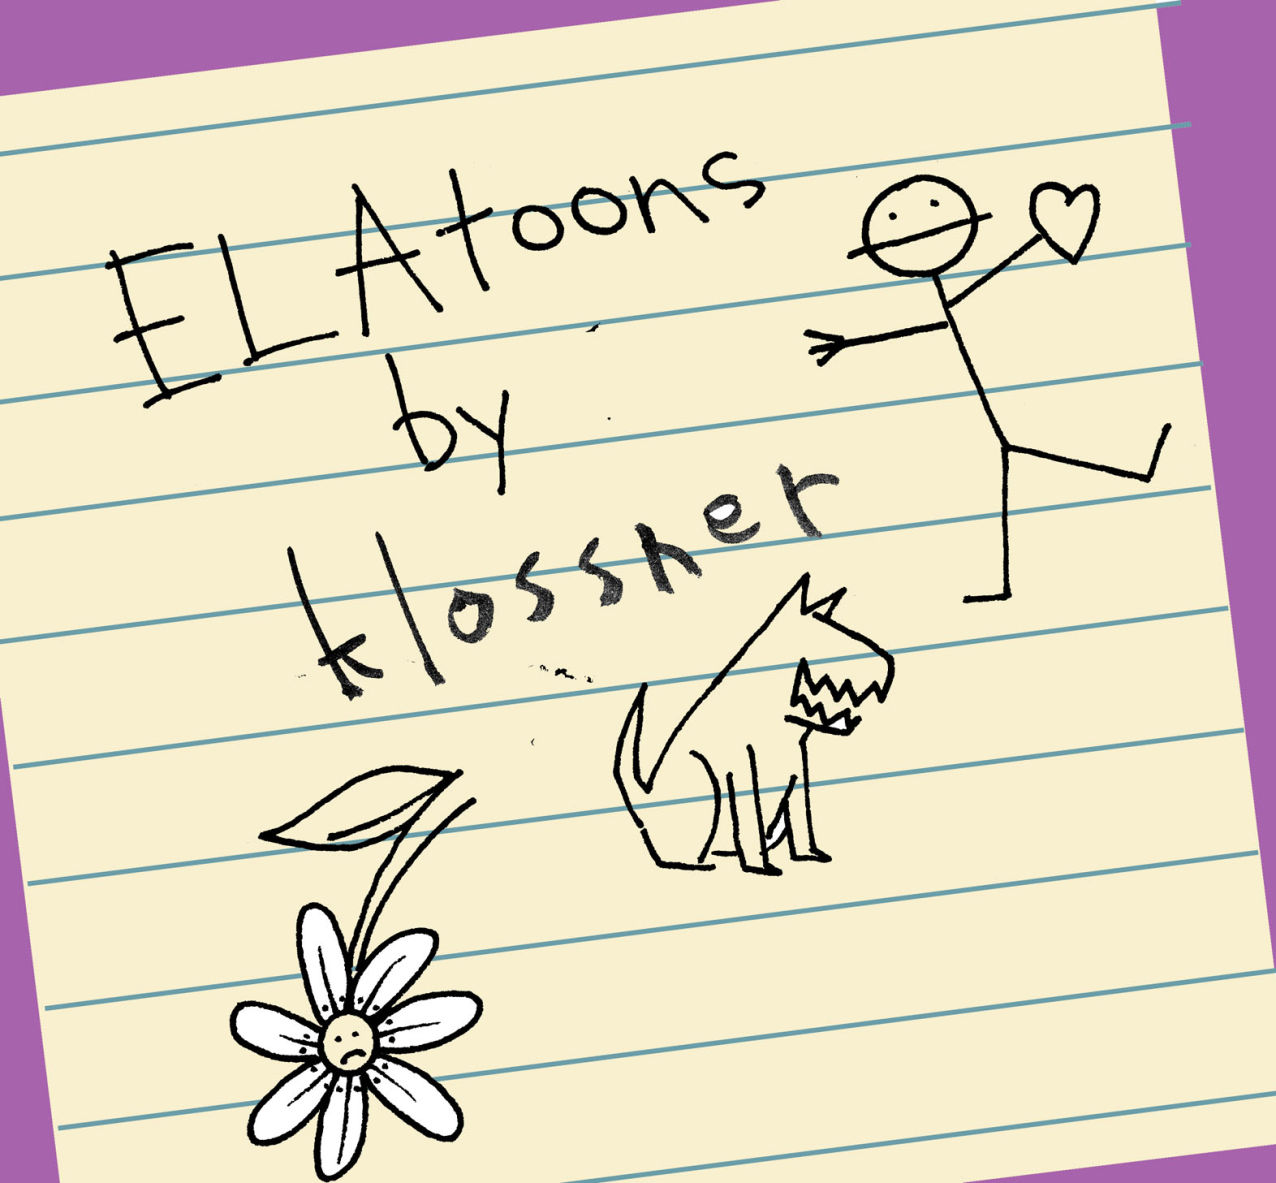 ELAtoons title page for Klossner by Klossner